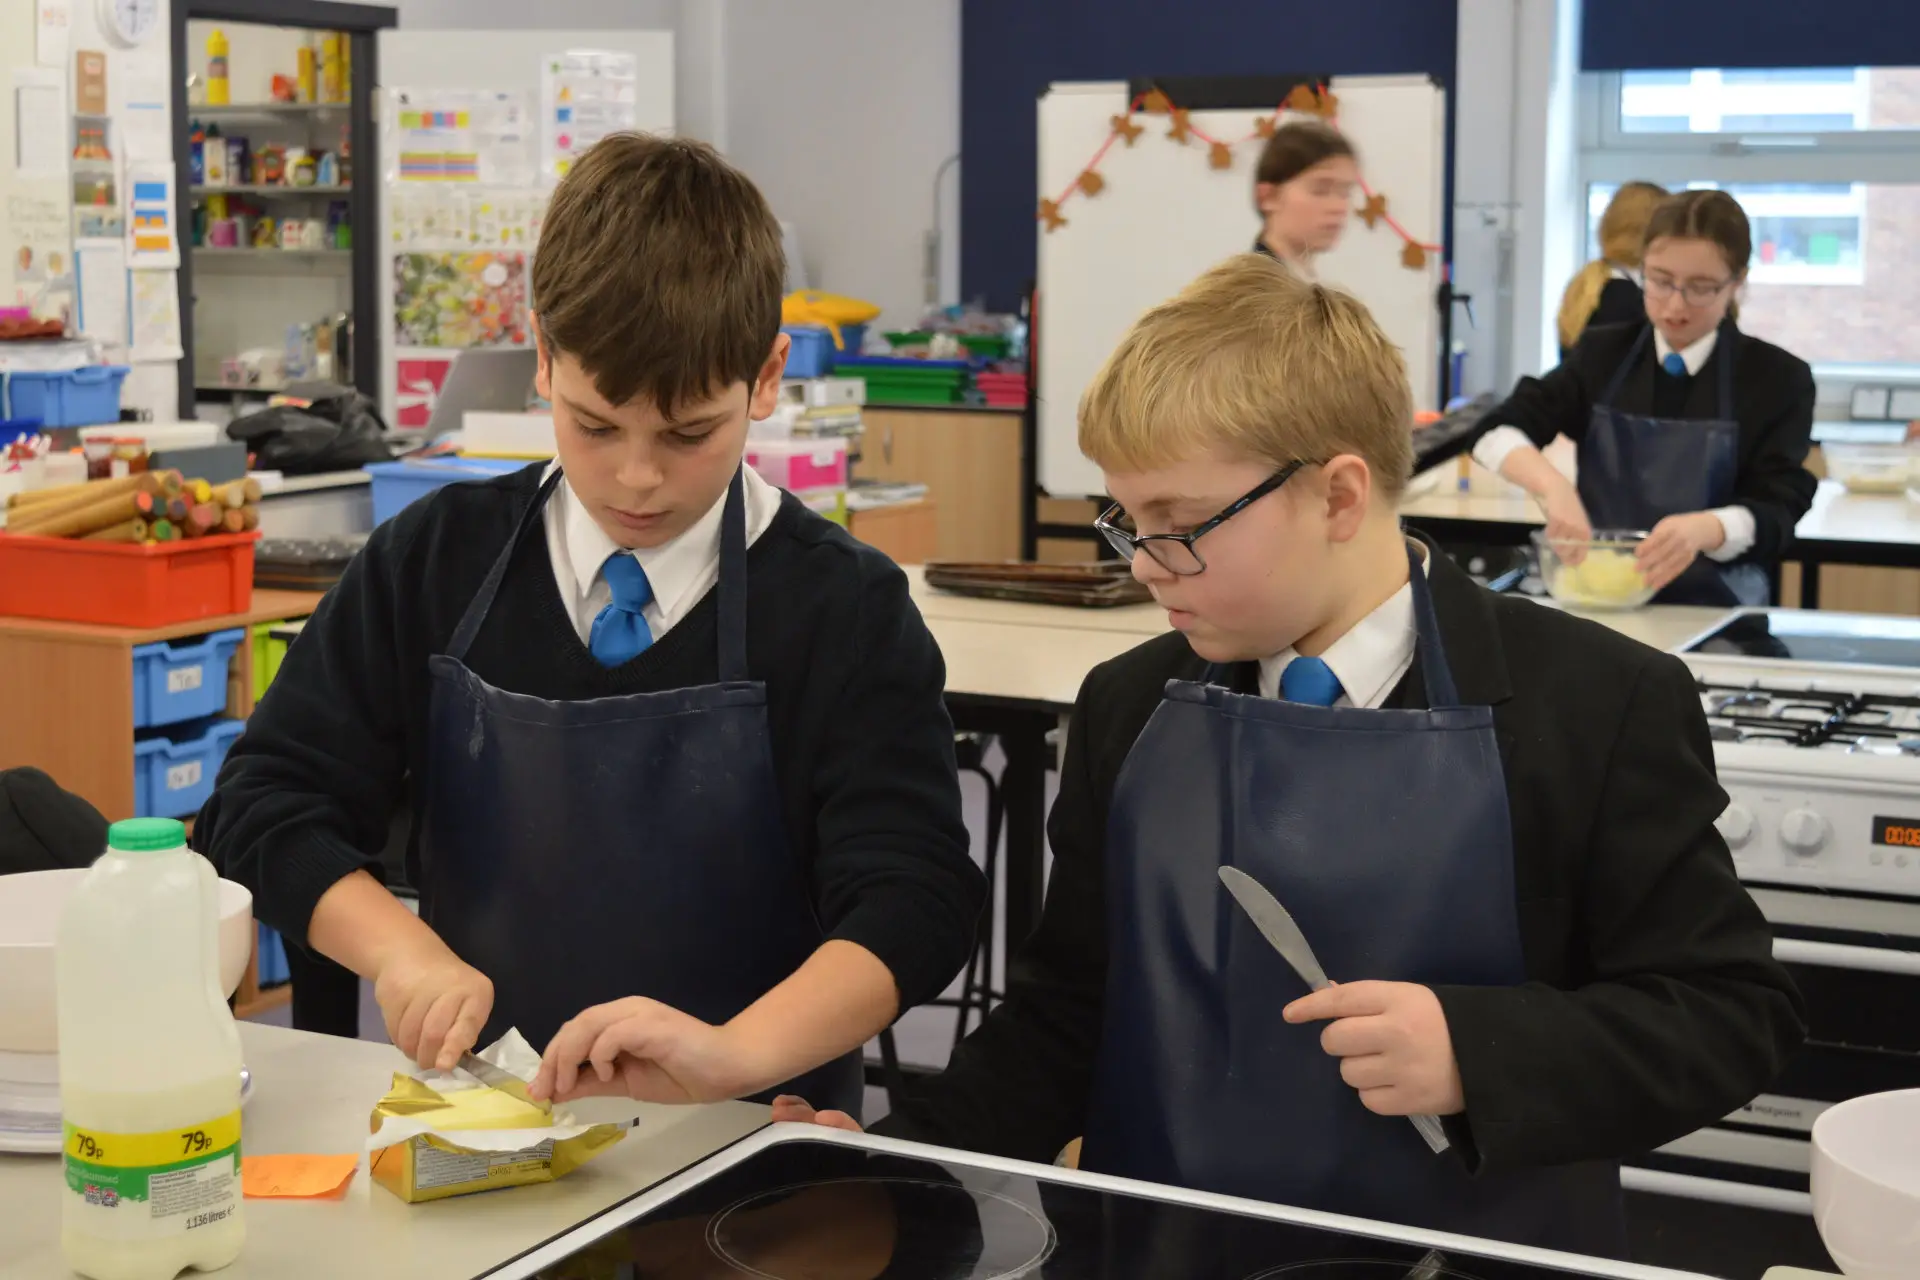 are Luca Patchett (age 12) and Lewey Way (11) - baking scones for the event